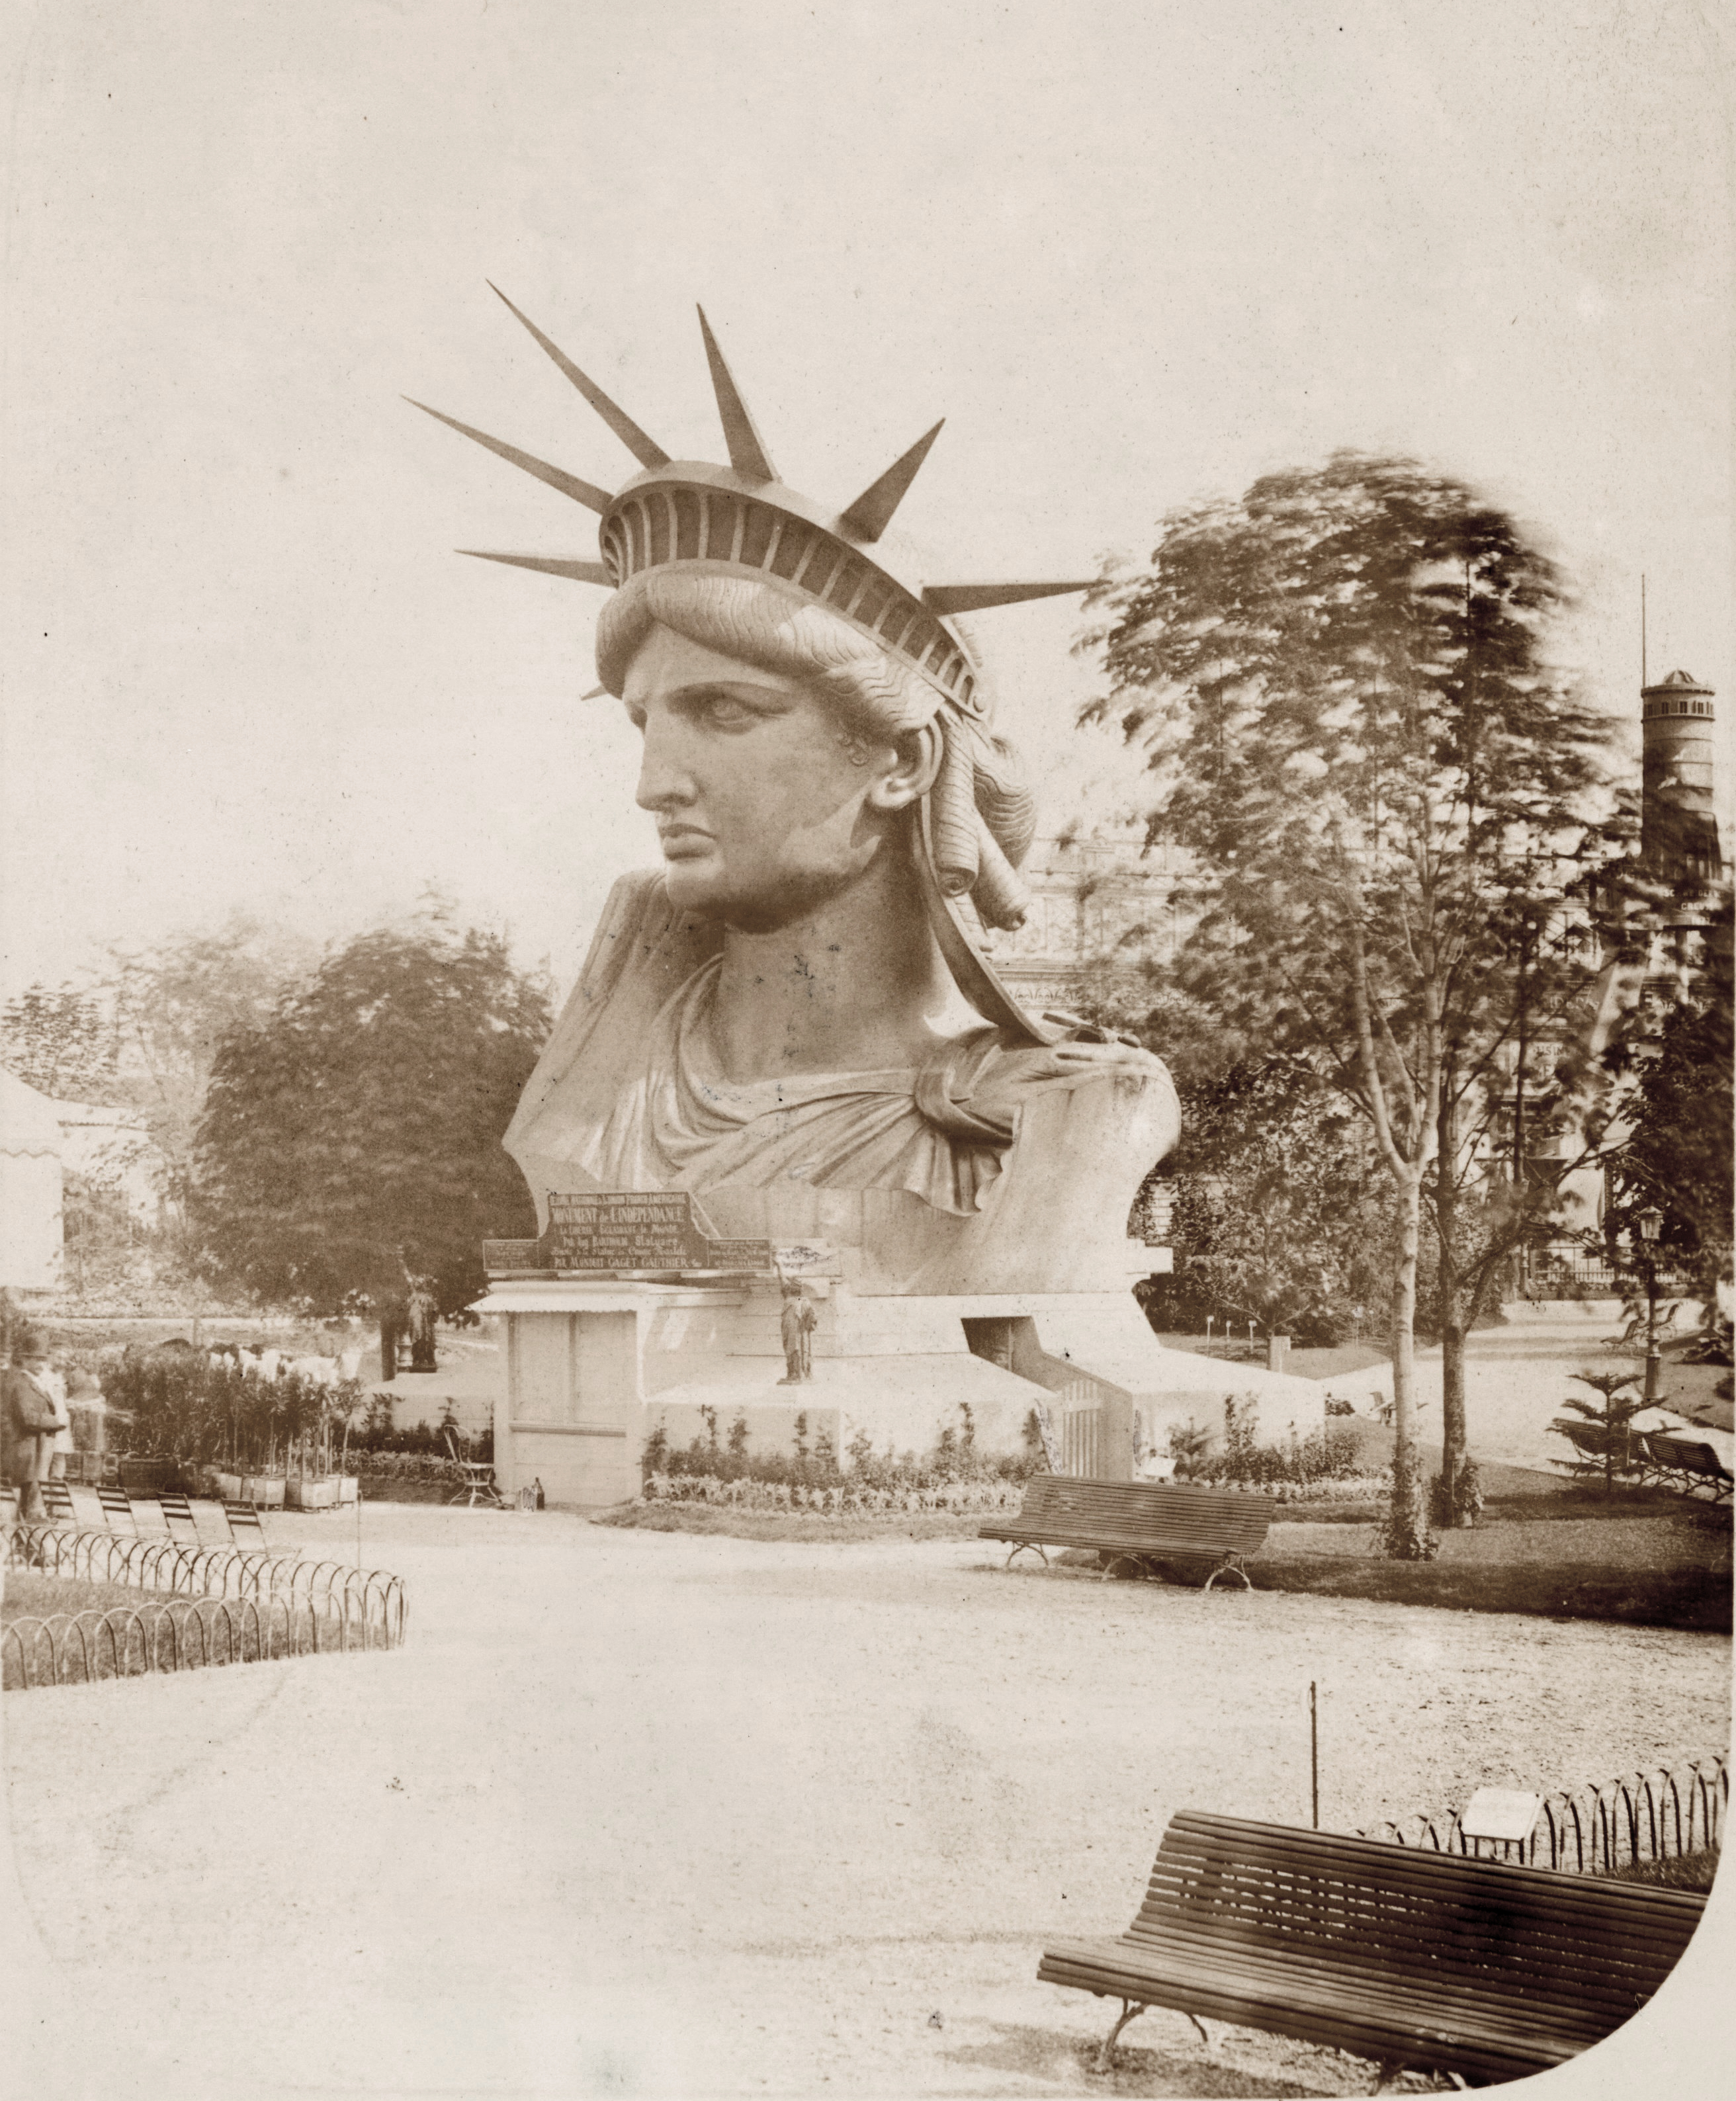 Image of the head of the Statue of Liberty